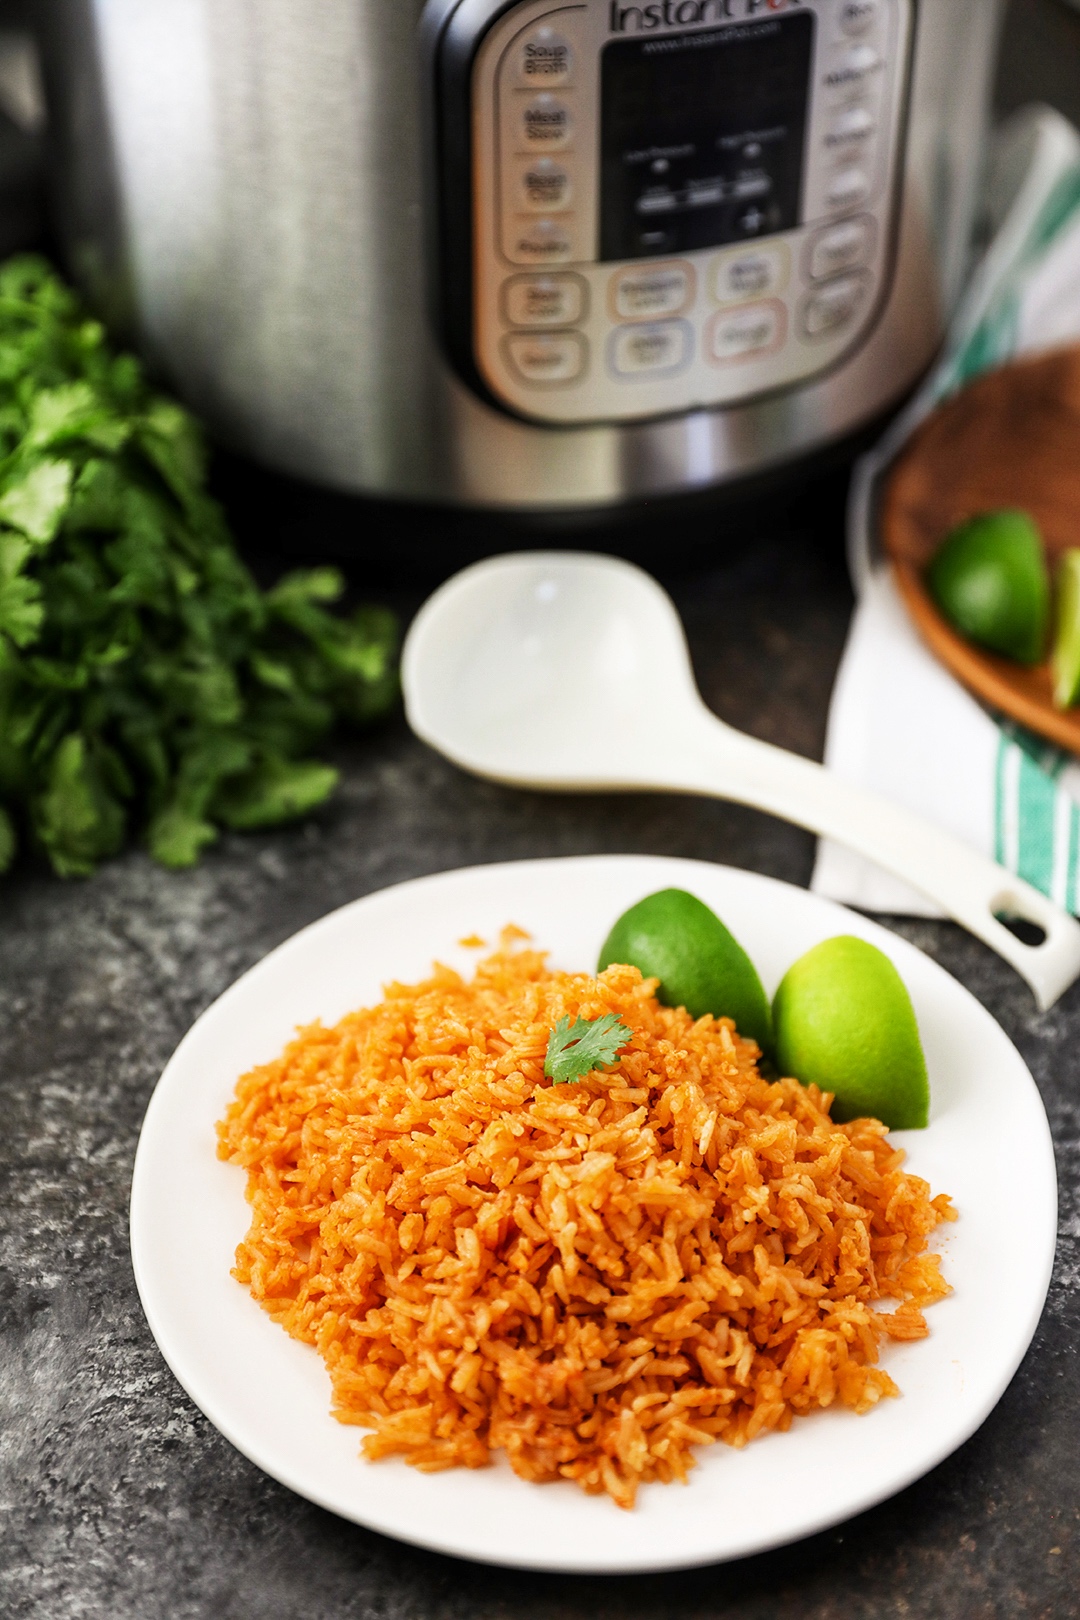 https://www.number-2-pencil.com/wp-content/uploads/2020/08/Instant-Pot-Mexican-Rice-Recipe-4.jpg